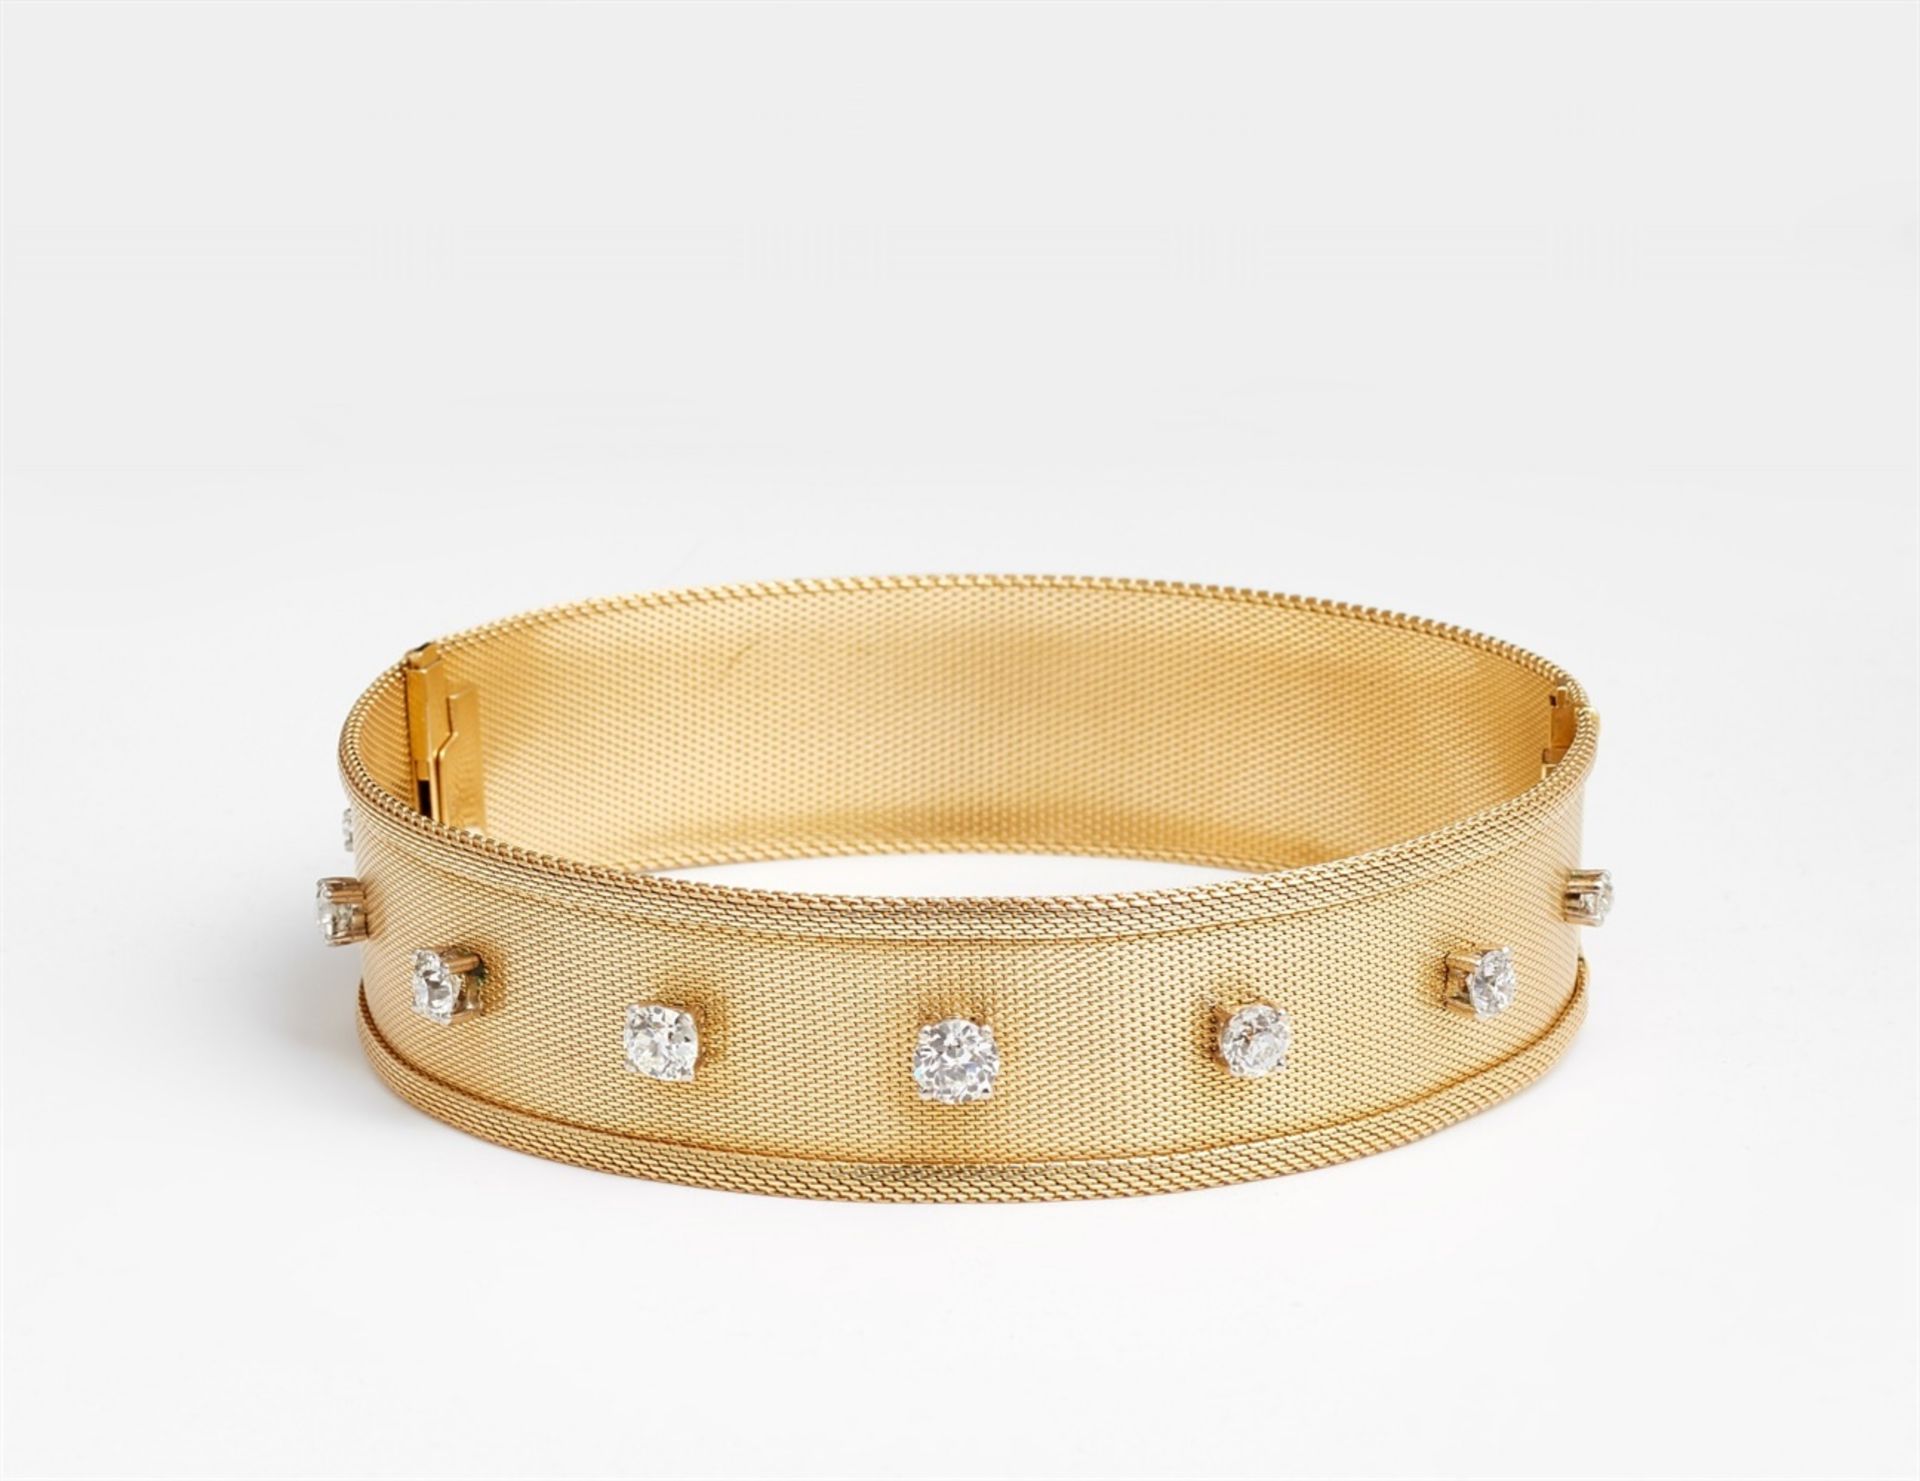 An 18k gold and diamond dog collarA two-piece choker, one half of which can be worn as a bracelet.